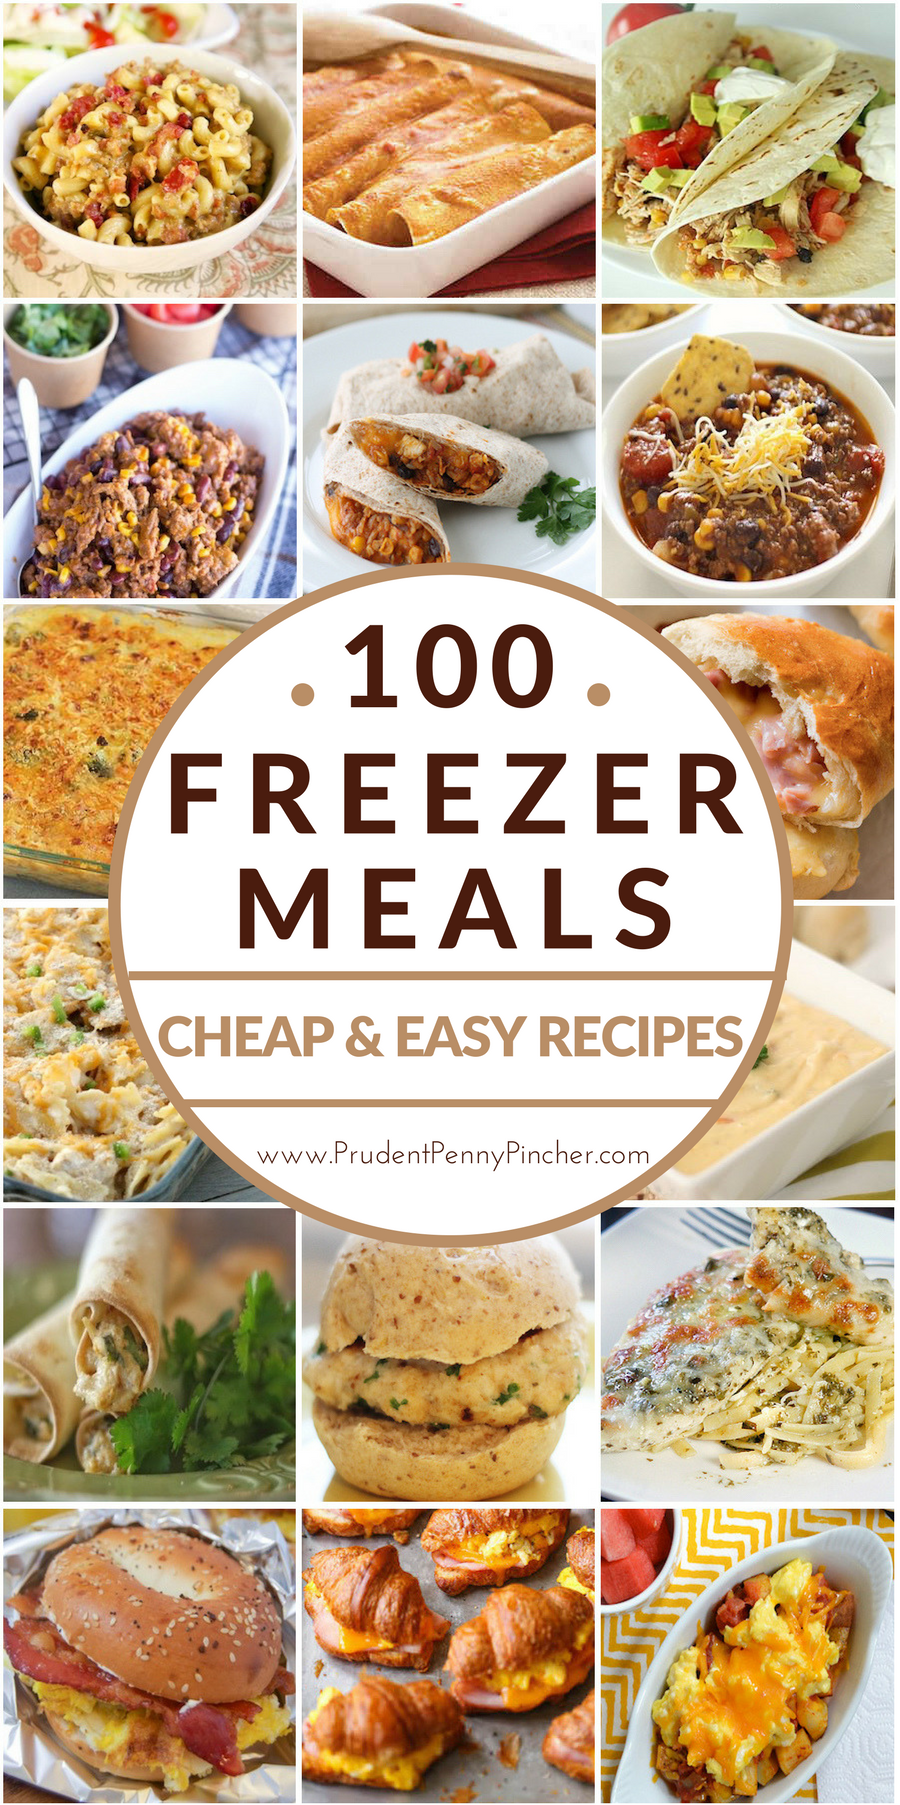 100 Cheap & Easy Freezer Meals - Prudent Penny Pincher